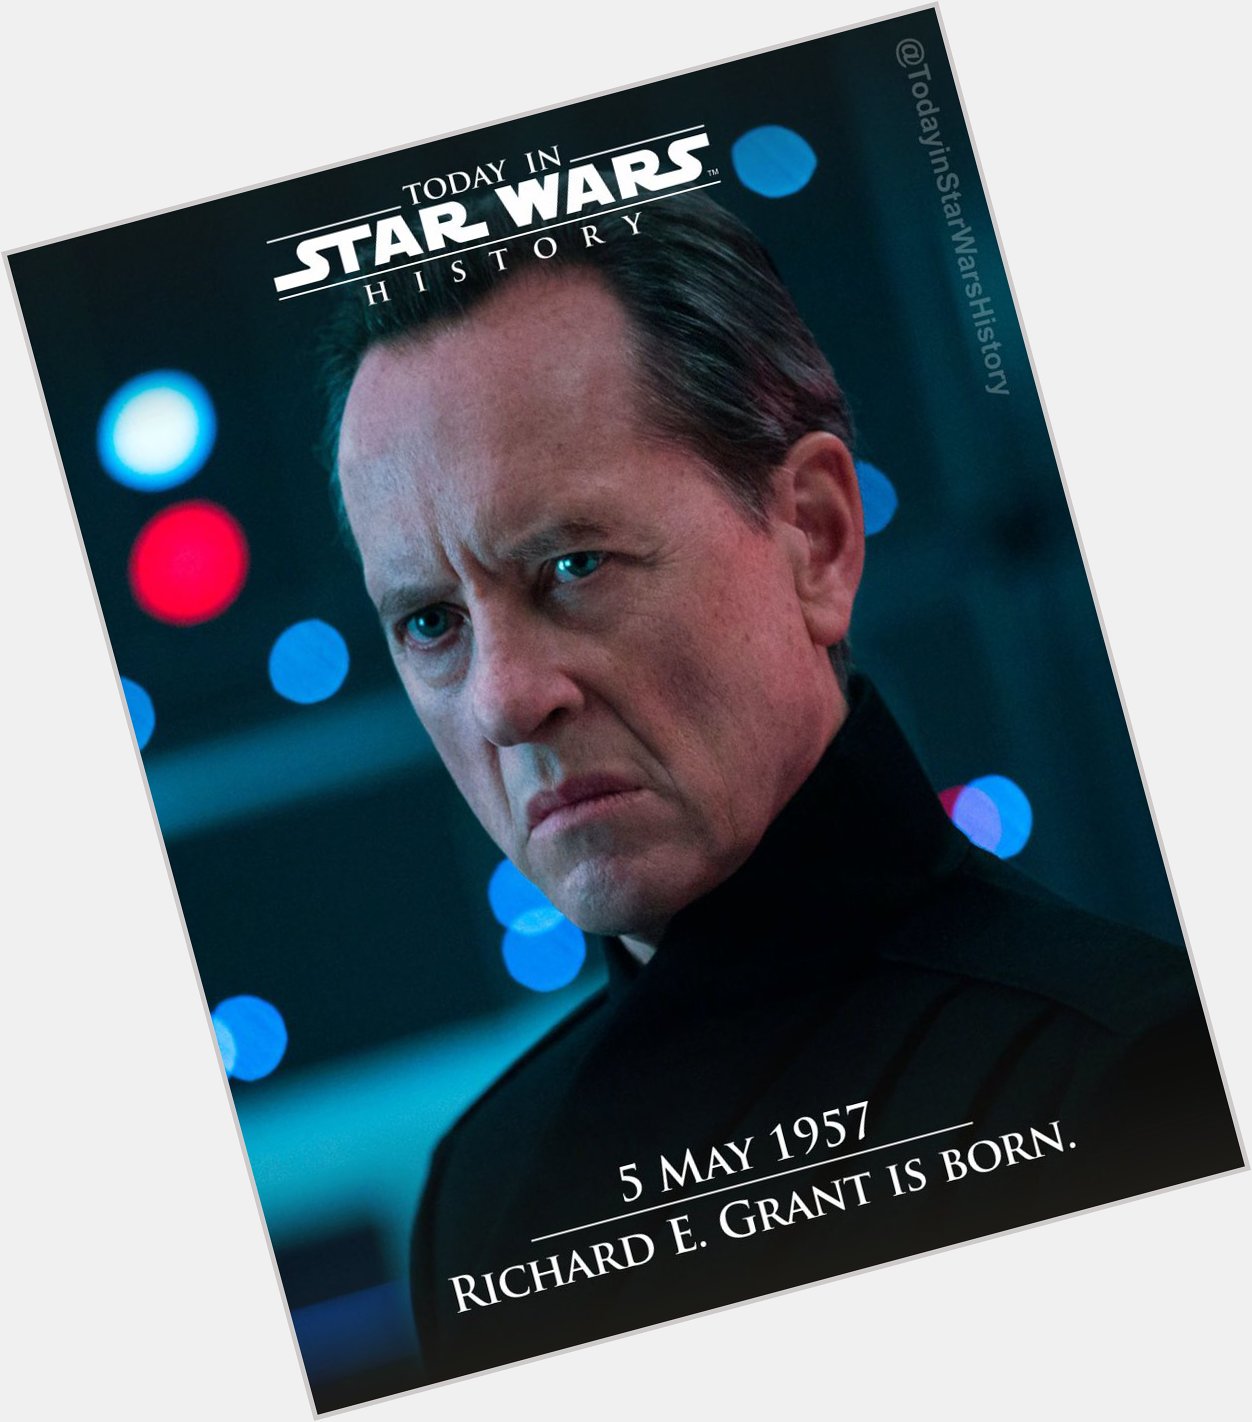 5 May 1957 Happy birthday to Richard E. Grant! General in 